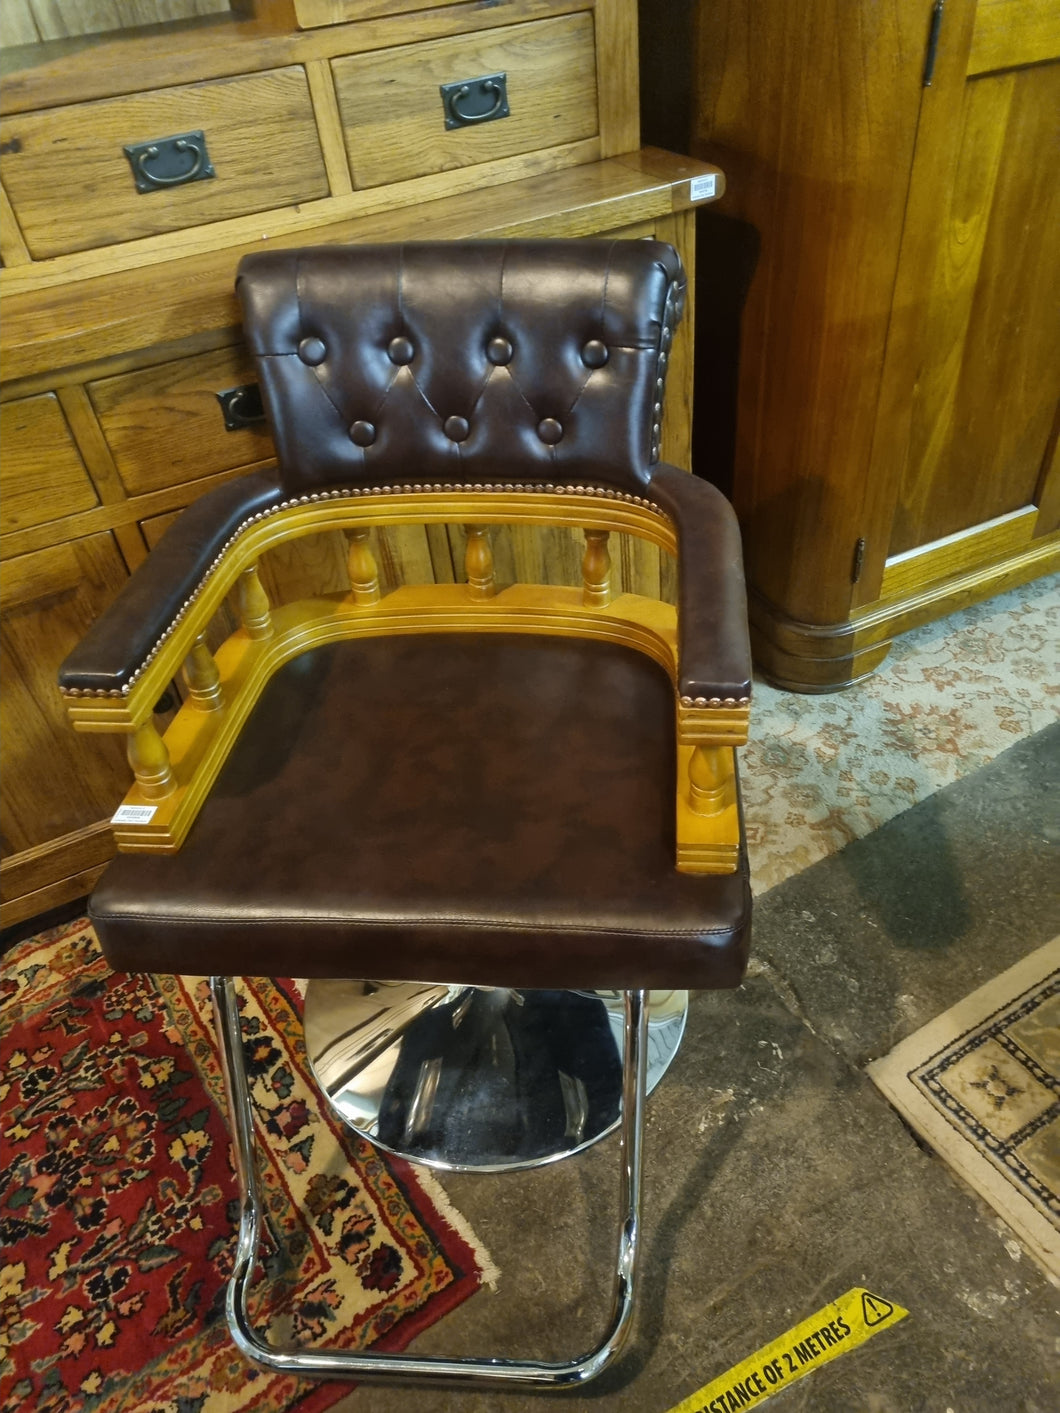 Leather barber chair